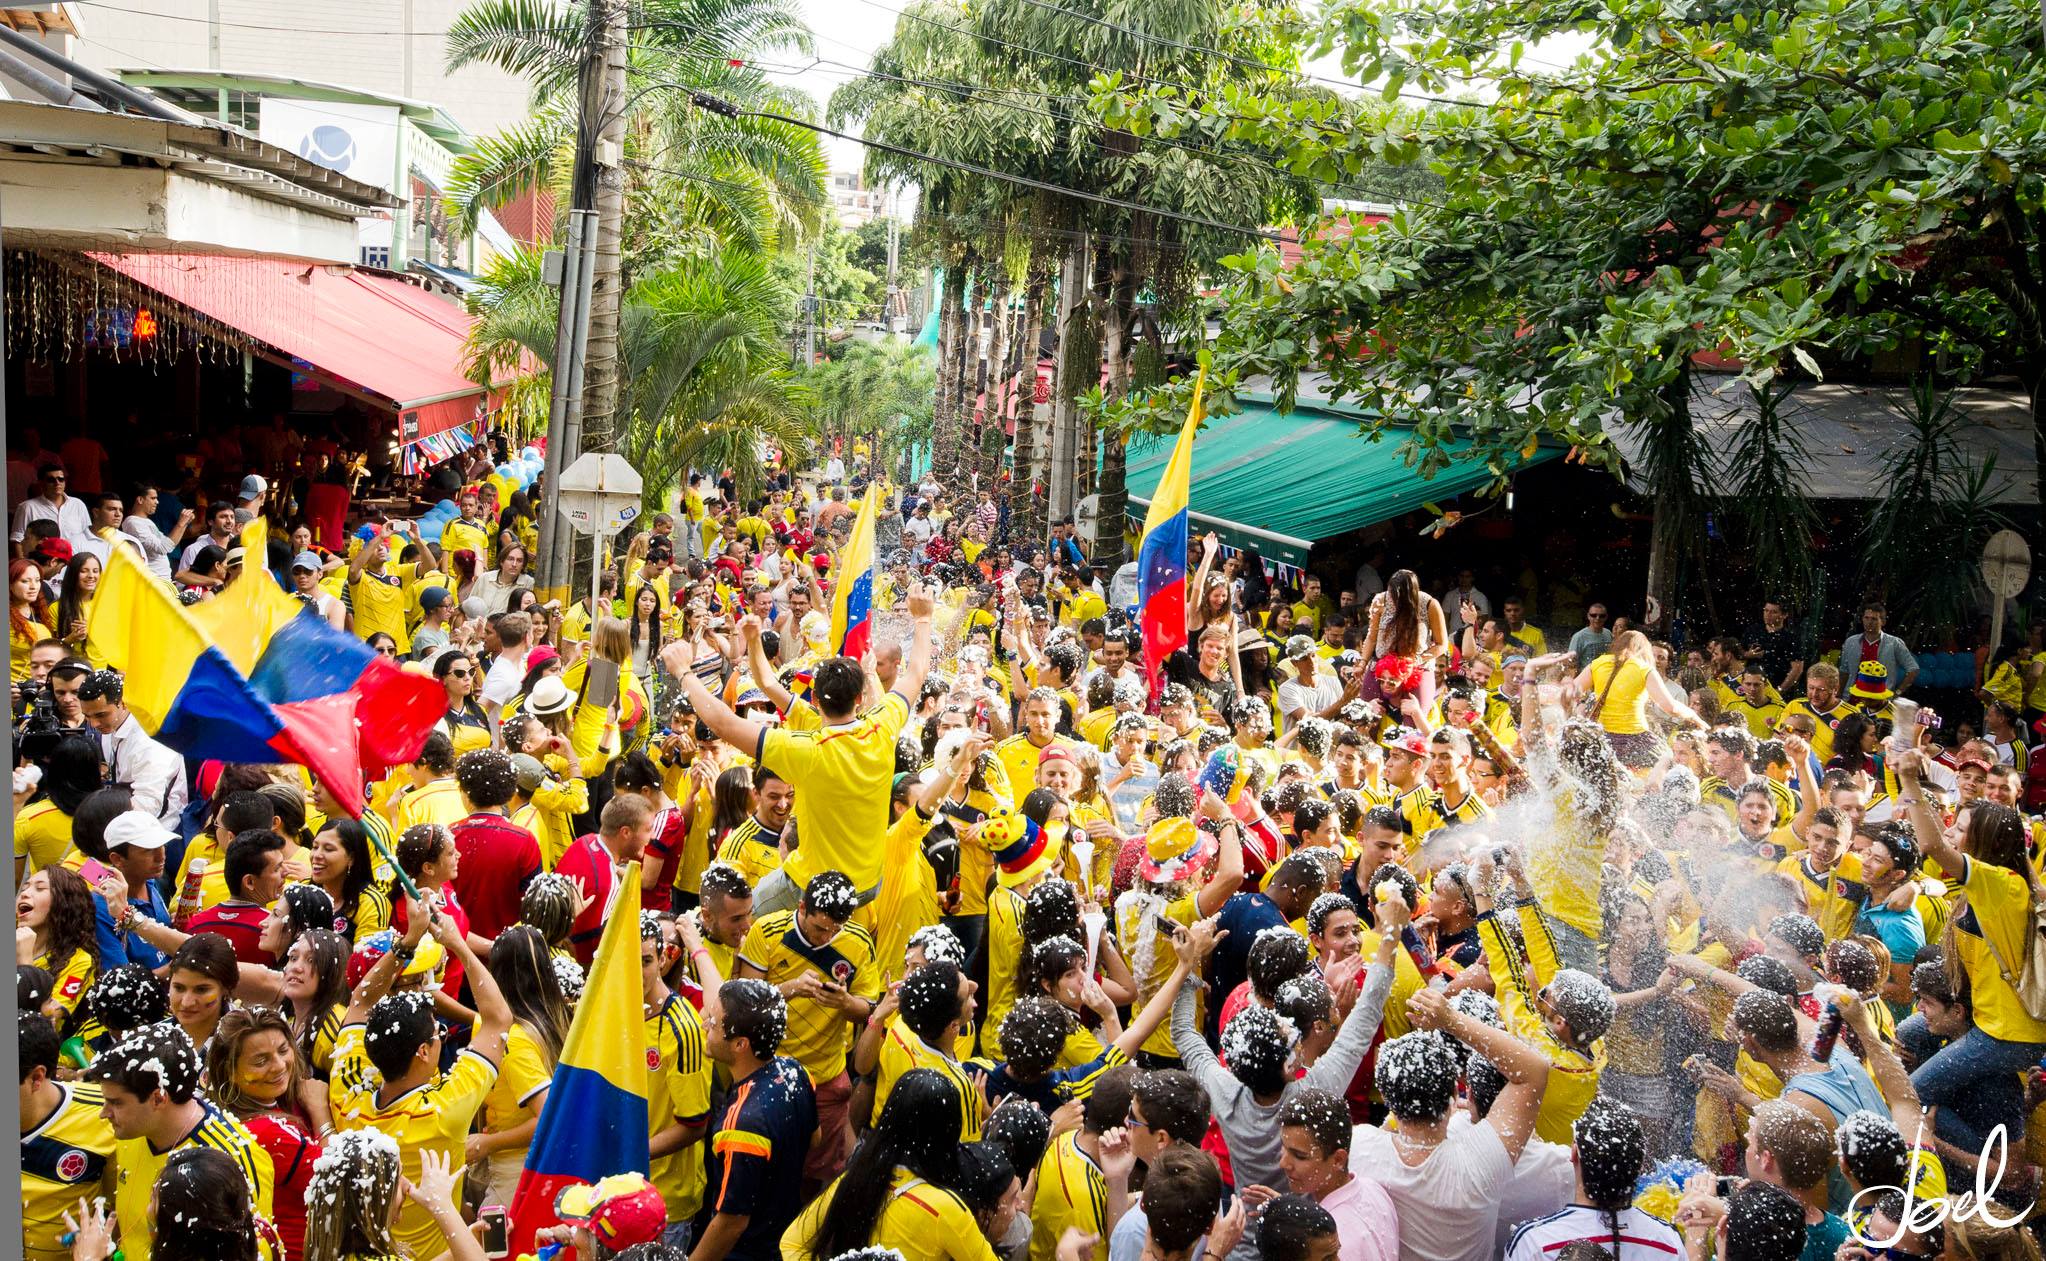 Colombian Independence Day